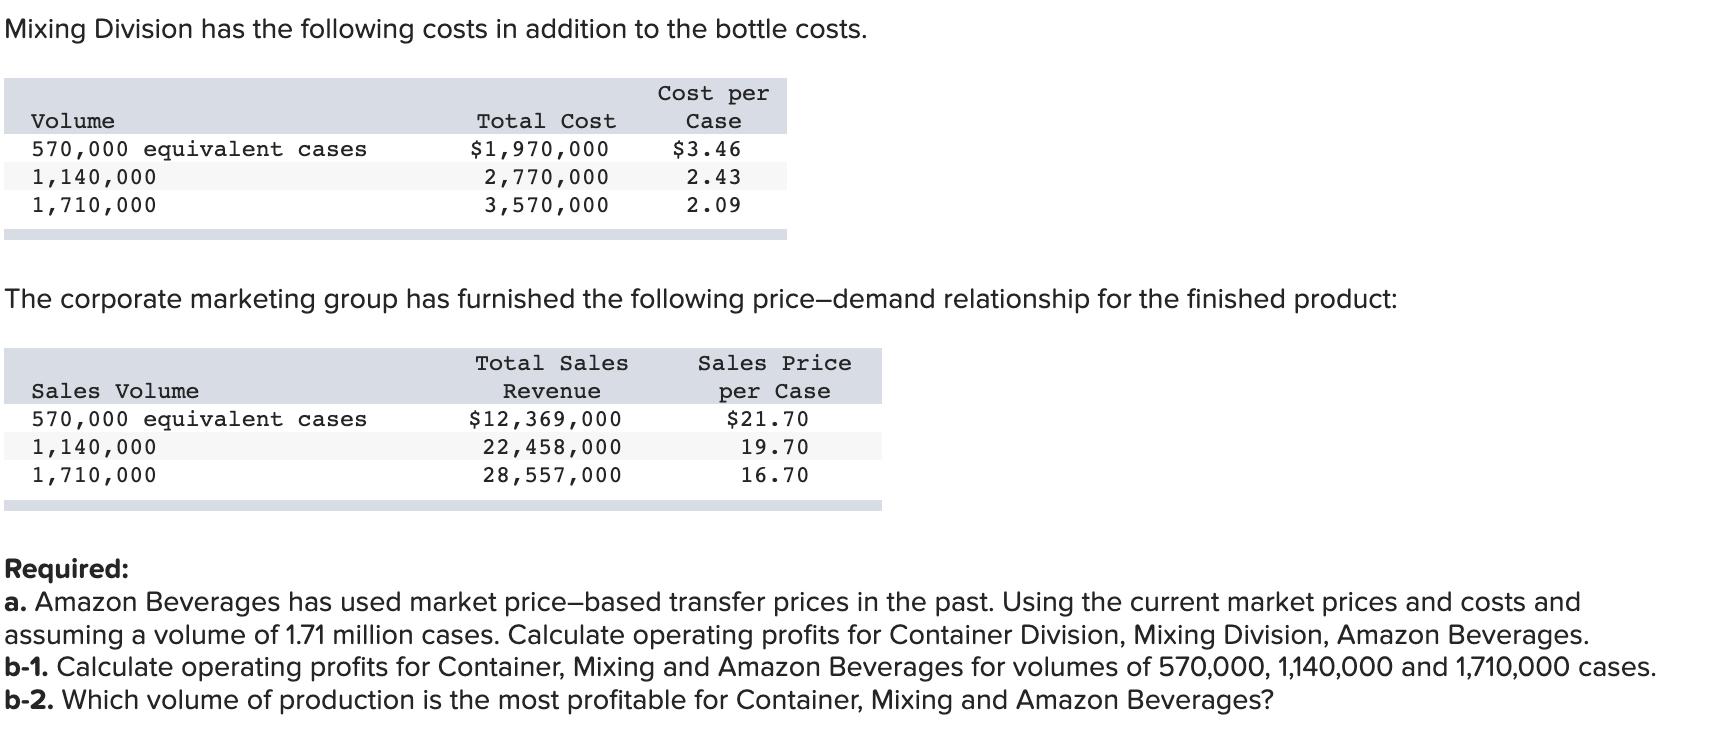 Mixing Division has the following costs in addition to the bottle costs. Volume 570,000 equivalent cases